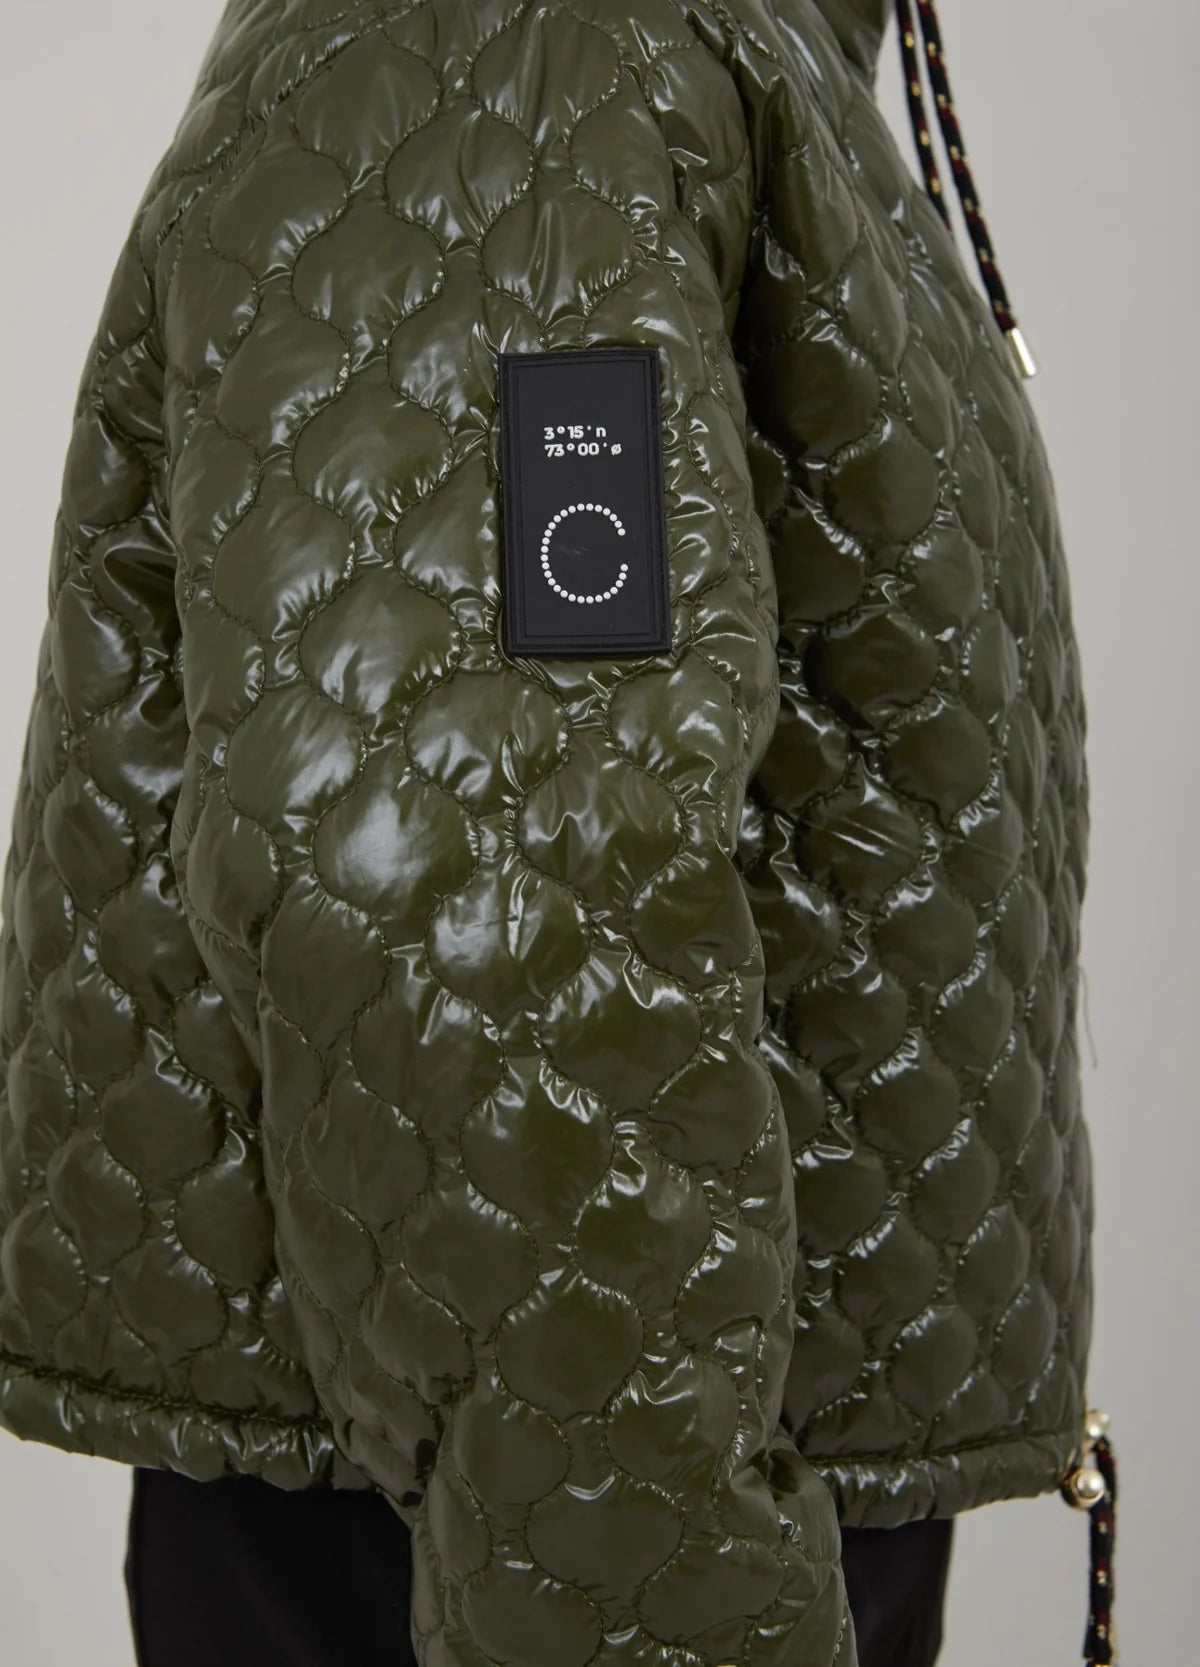 Coster Quilted Jacket